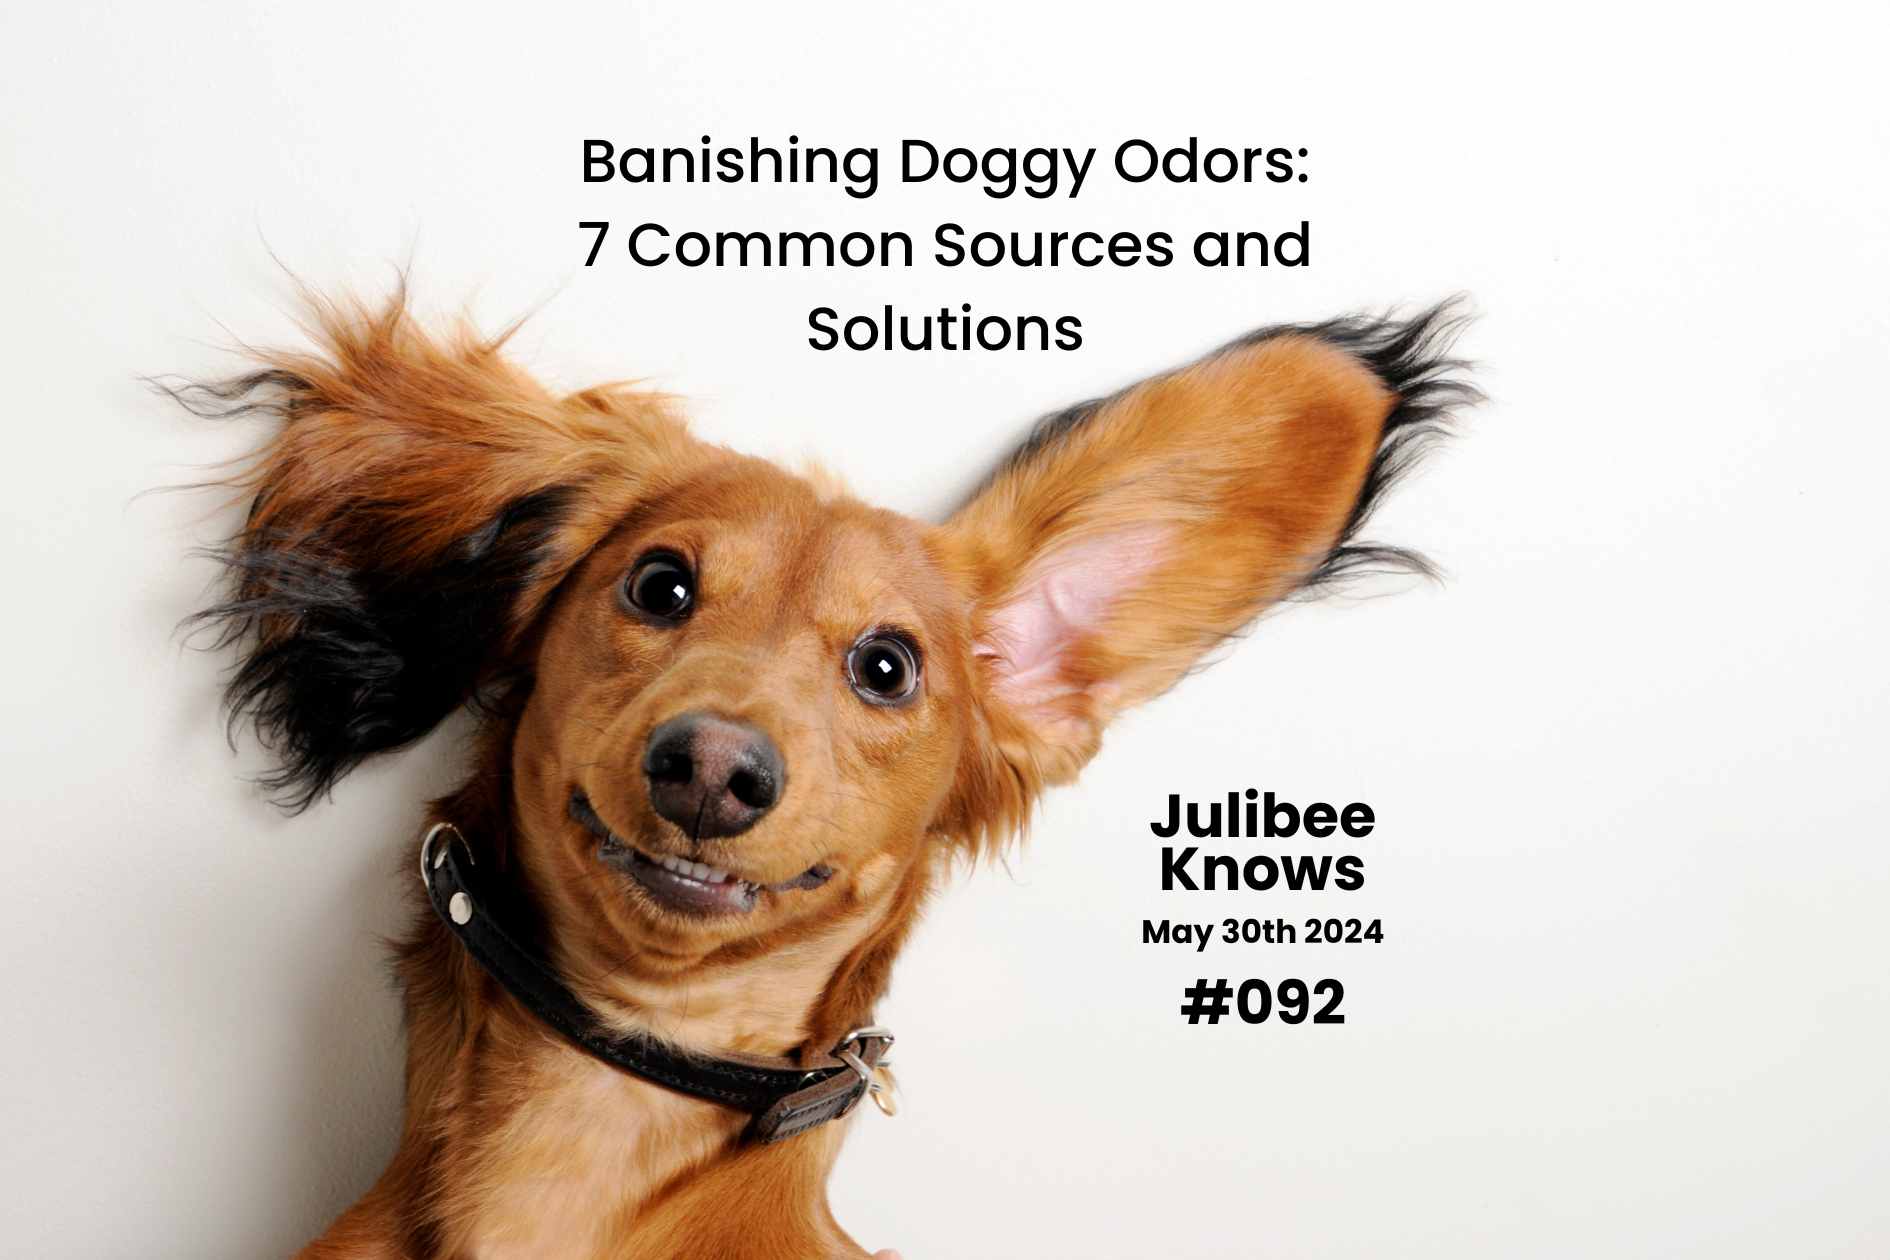 Banishing Doggy Odors 7 Common Sources and Solutions